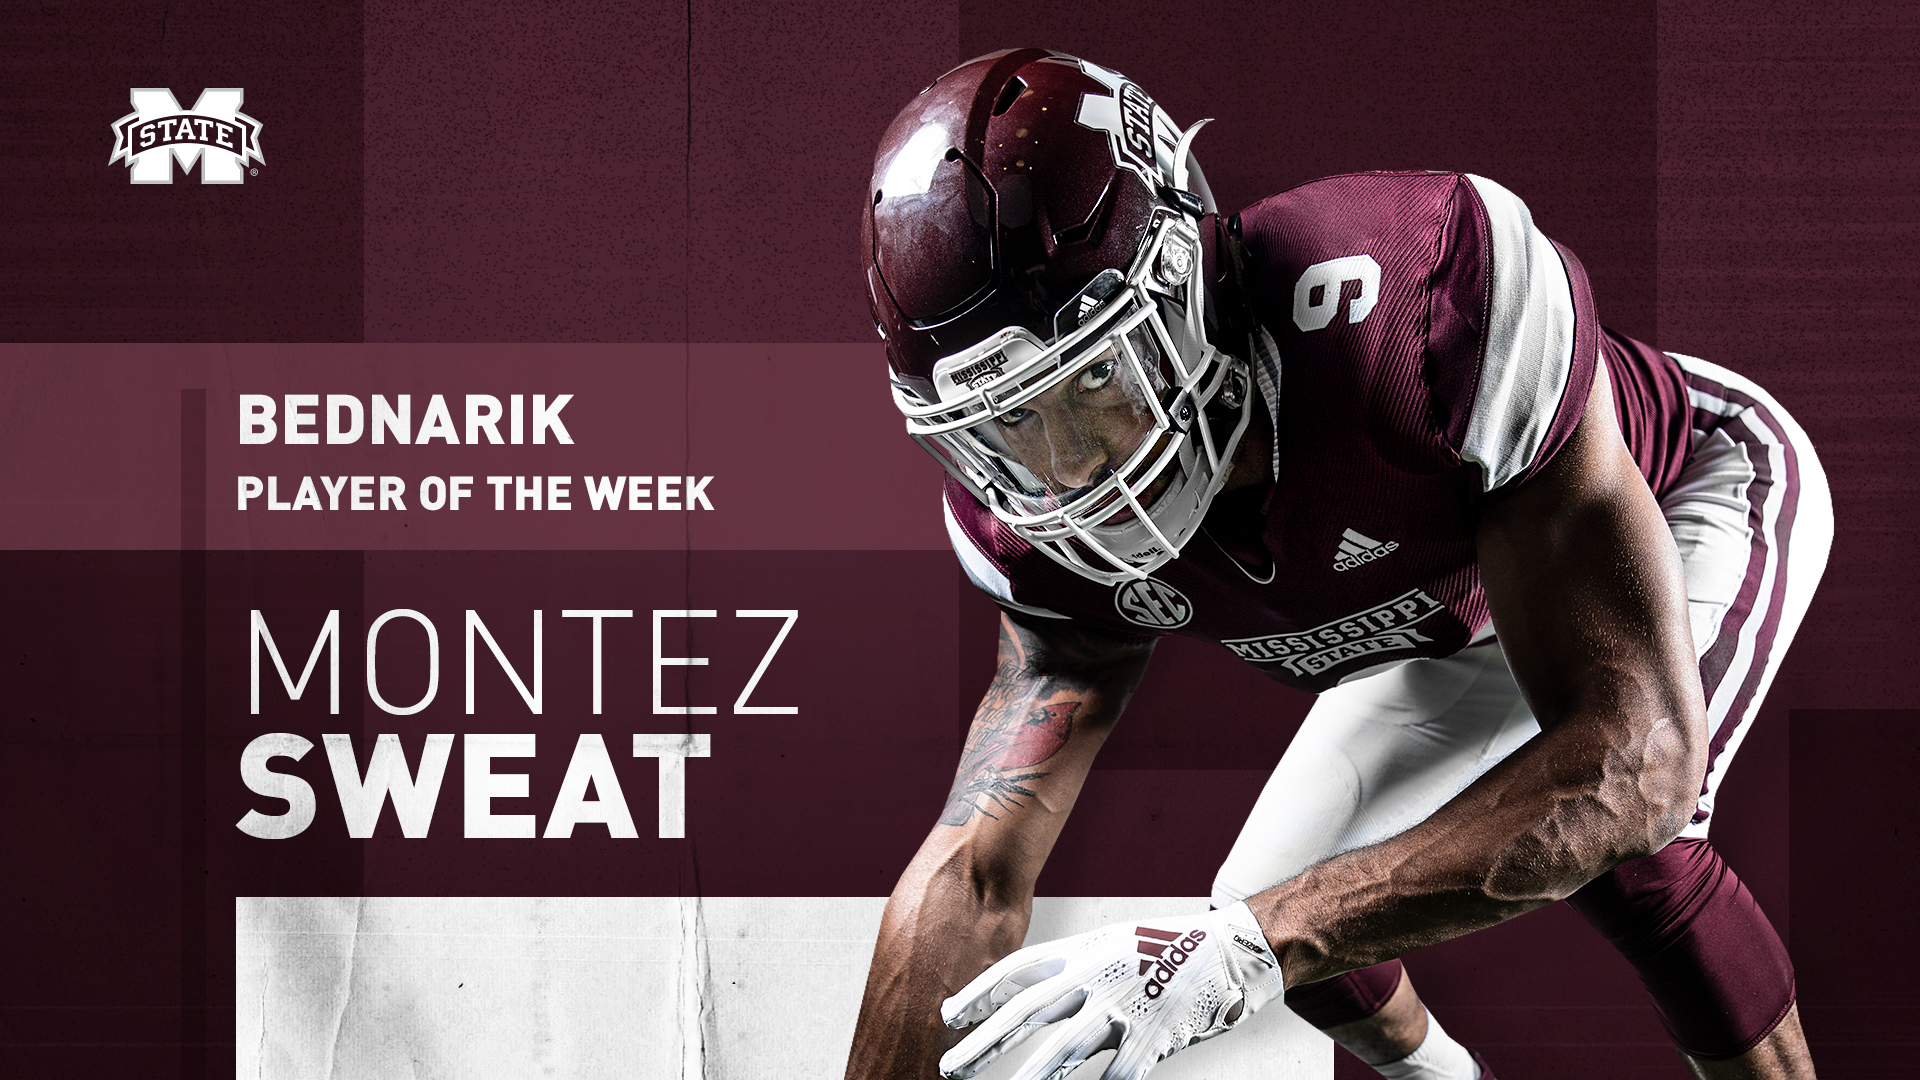 Sweat Scores National Player of the Week Honor